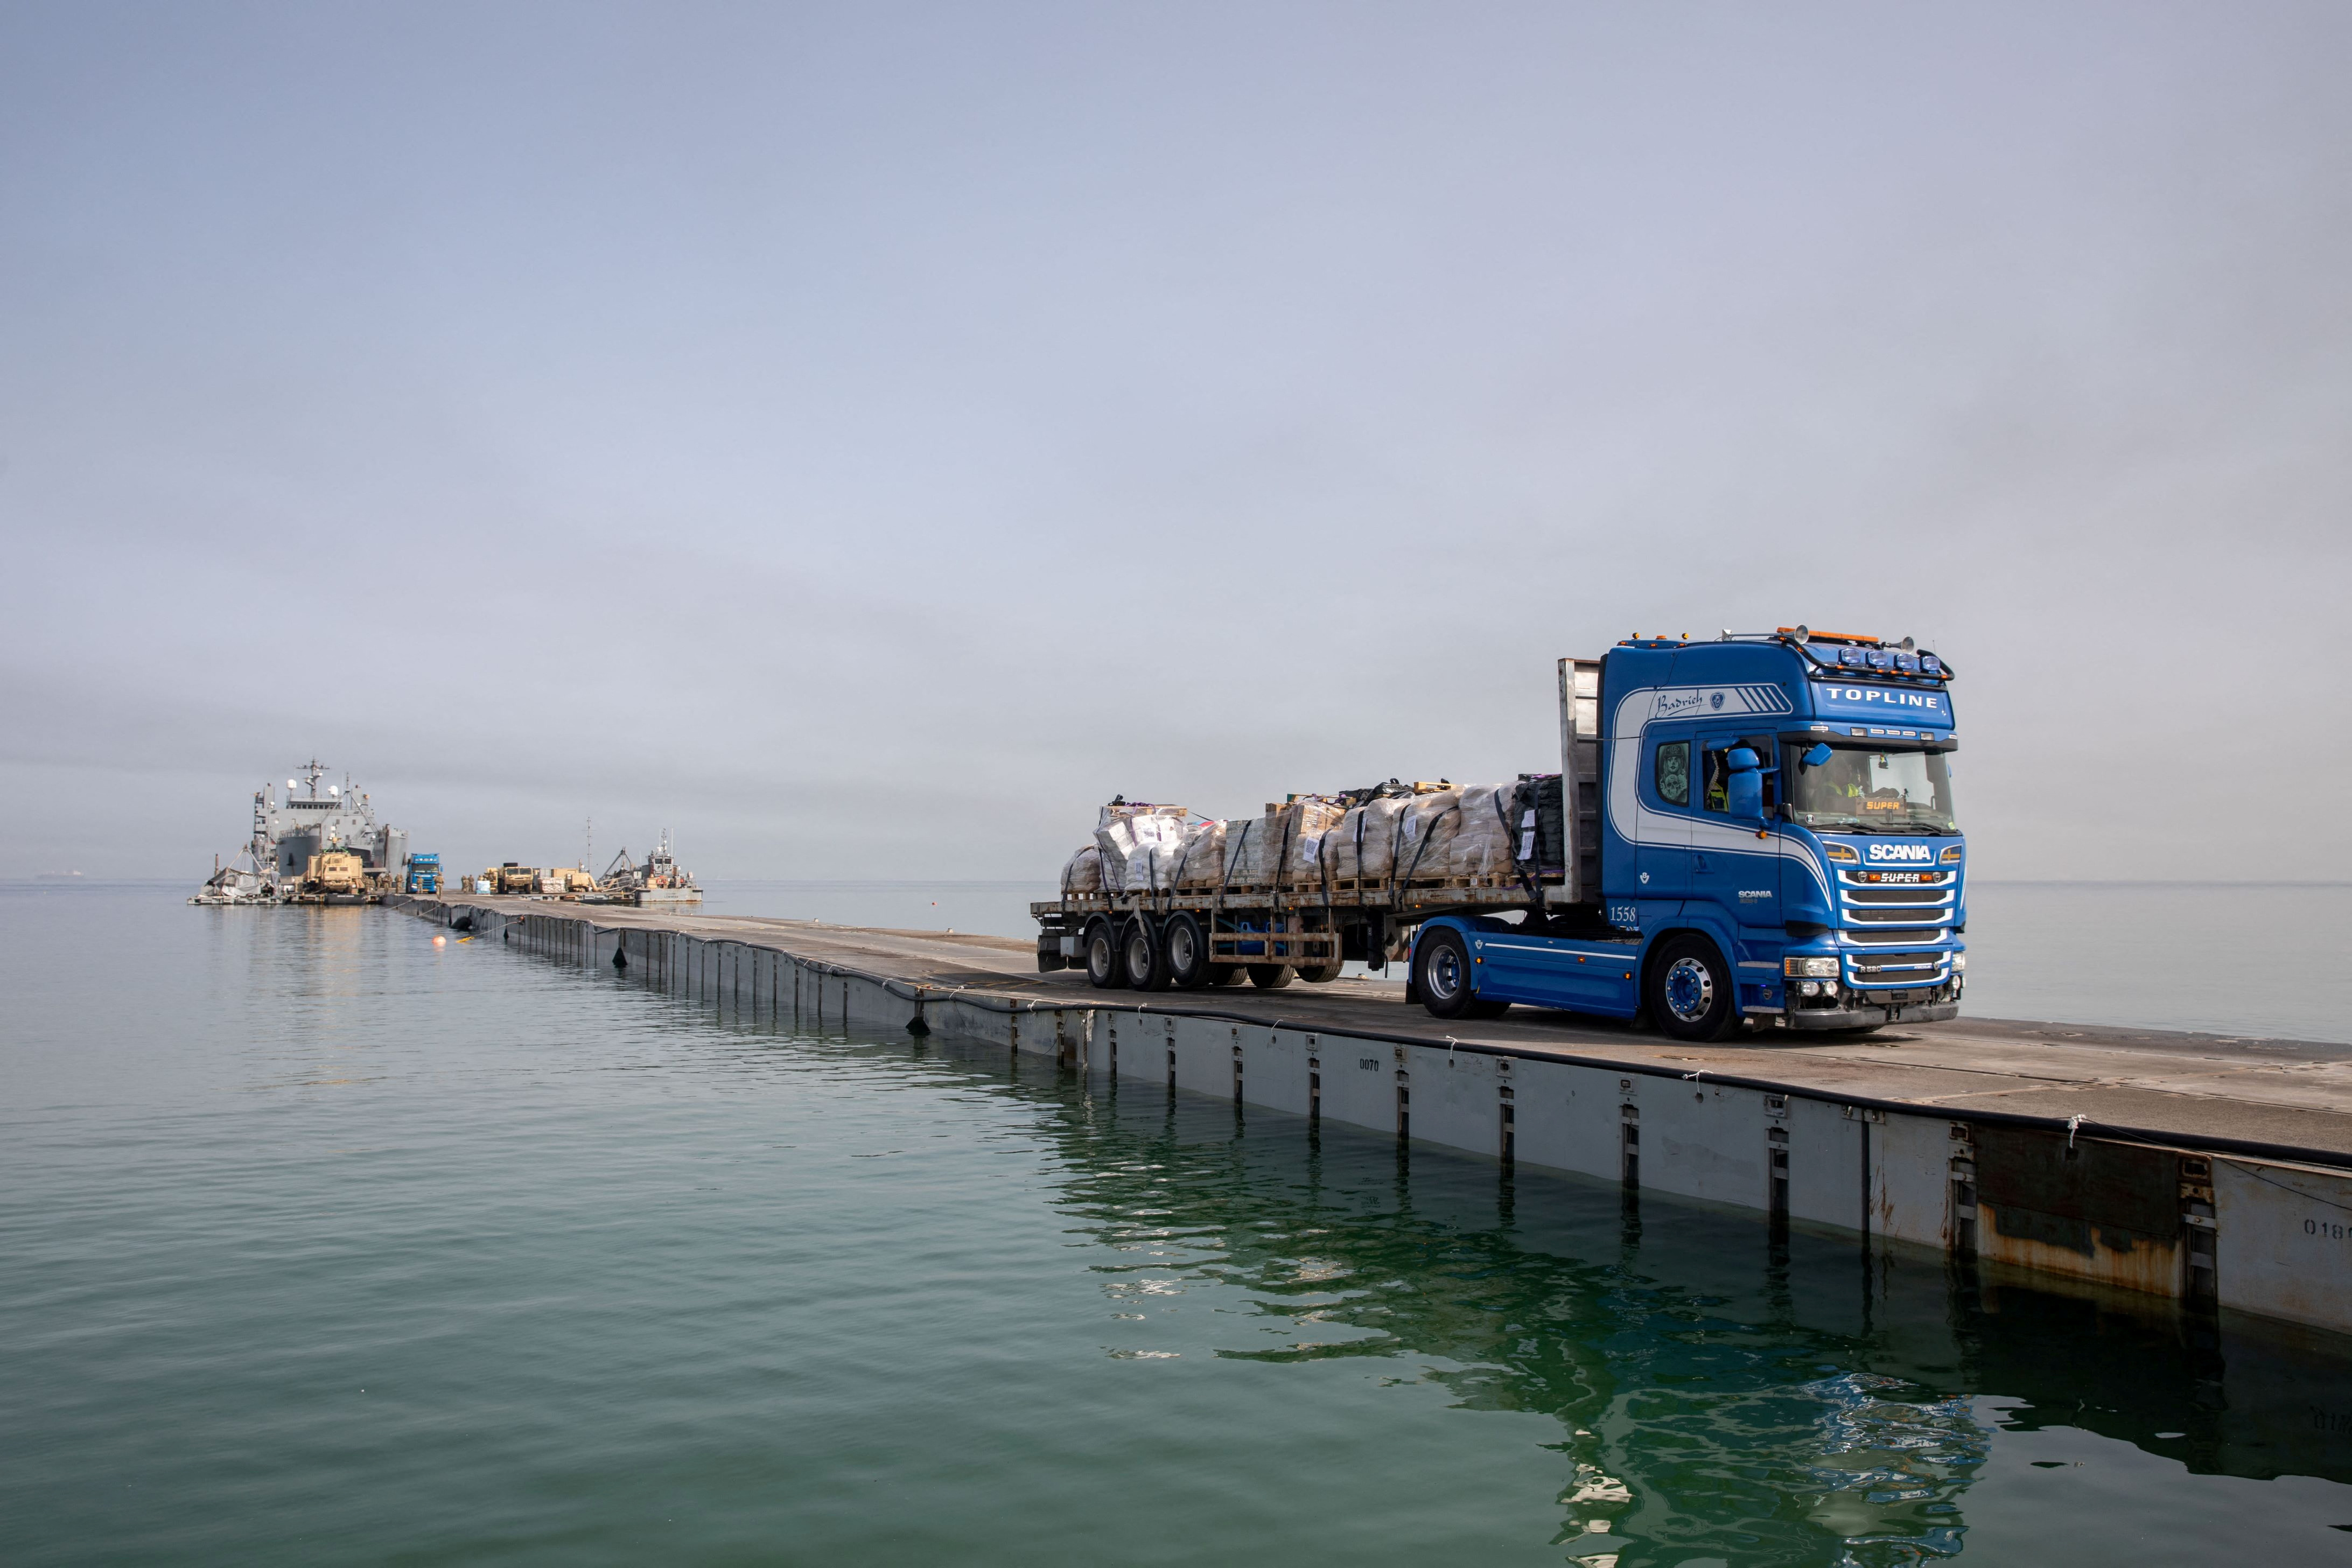 Trucks deliver humanitarian aid over a temporary pier on the Gaza coast